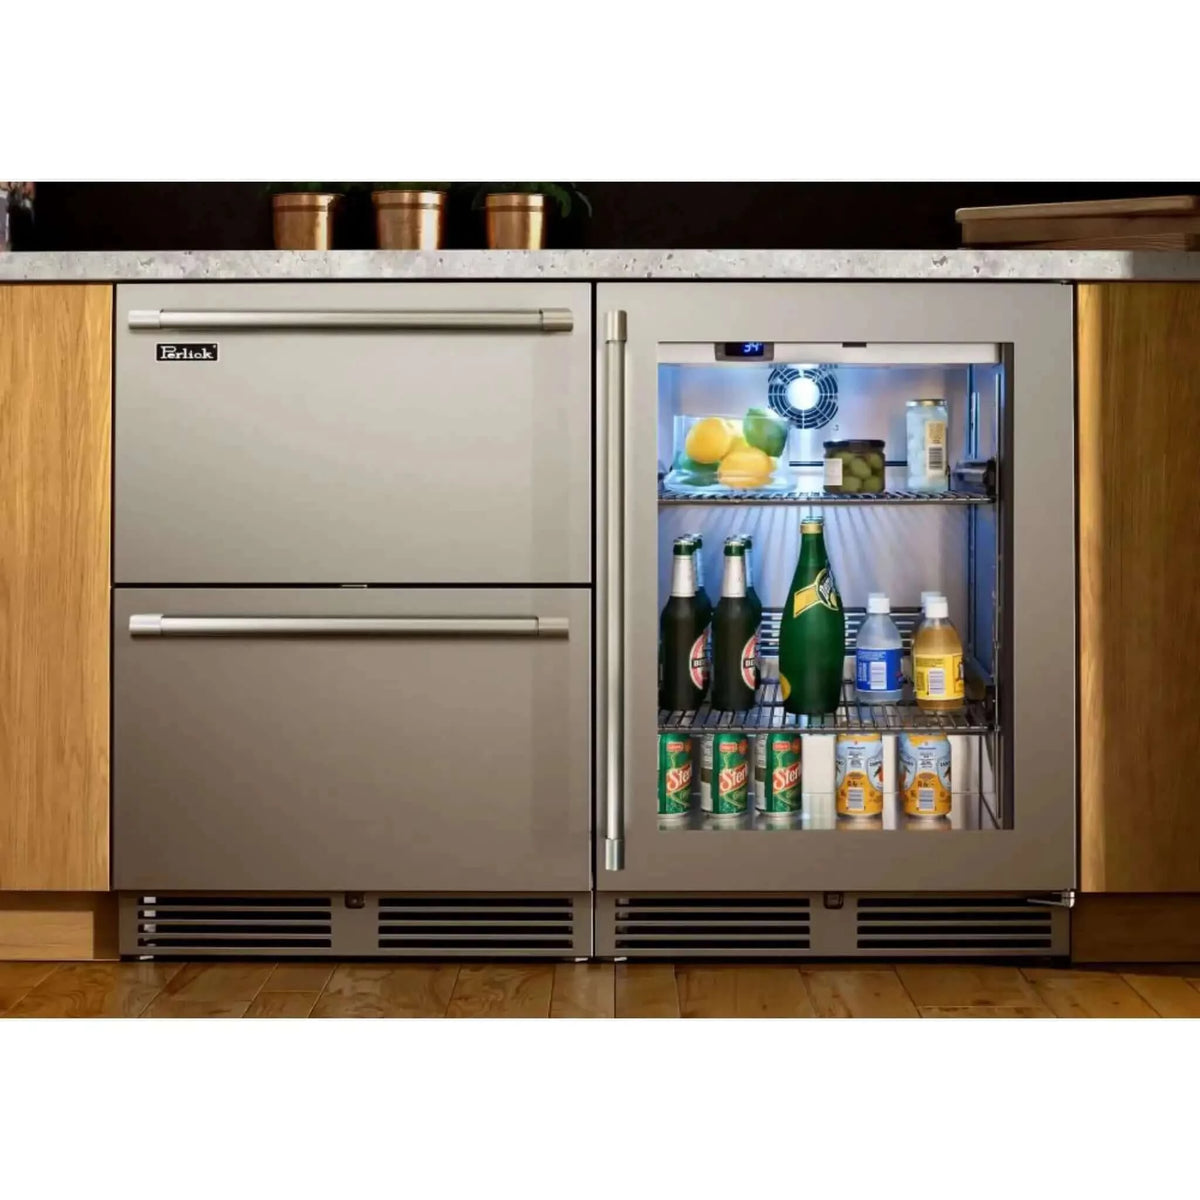 Perlick 24 Signature Series Outdoor Freezer with Drawers